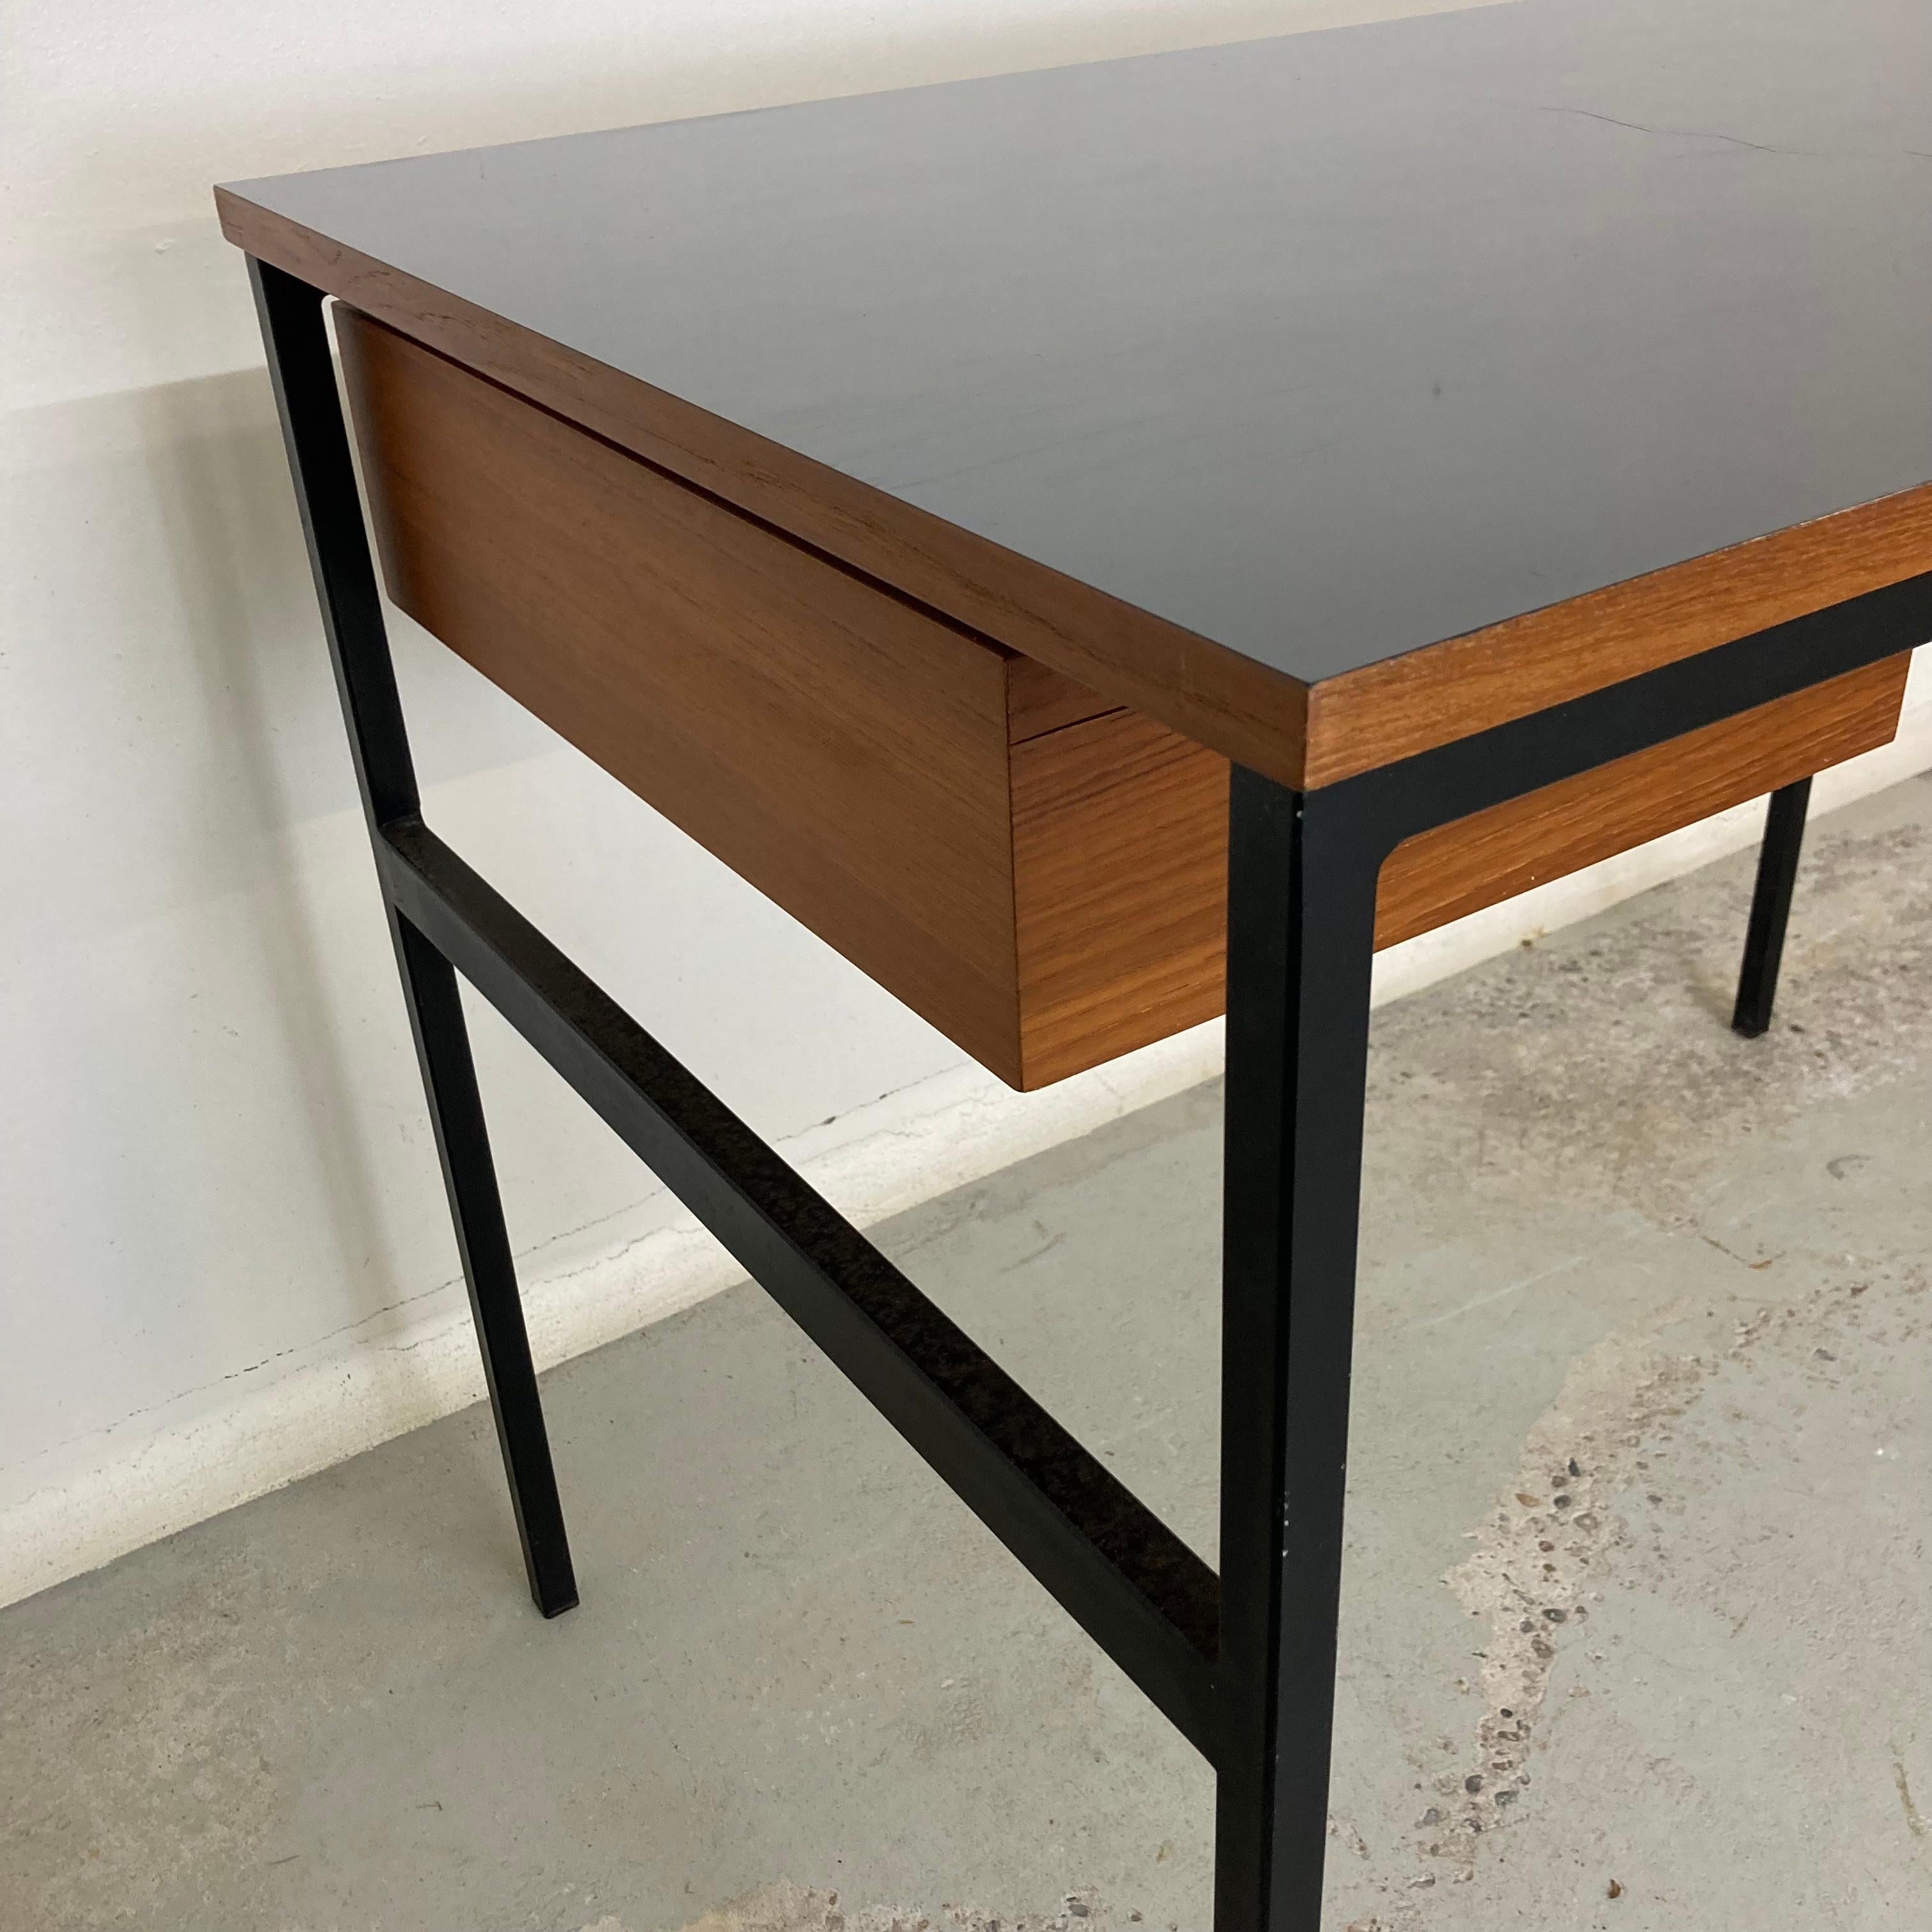 Pierre Paulin & Thonet Desk with Drawer, Metal Teak & Formica, France Circa 1955 For Sale 8